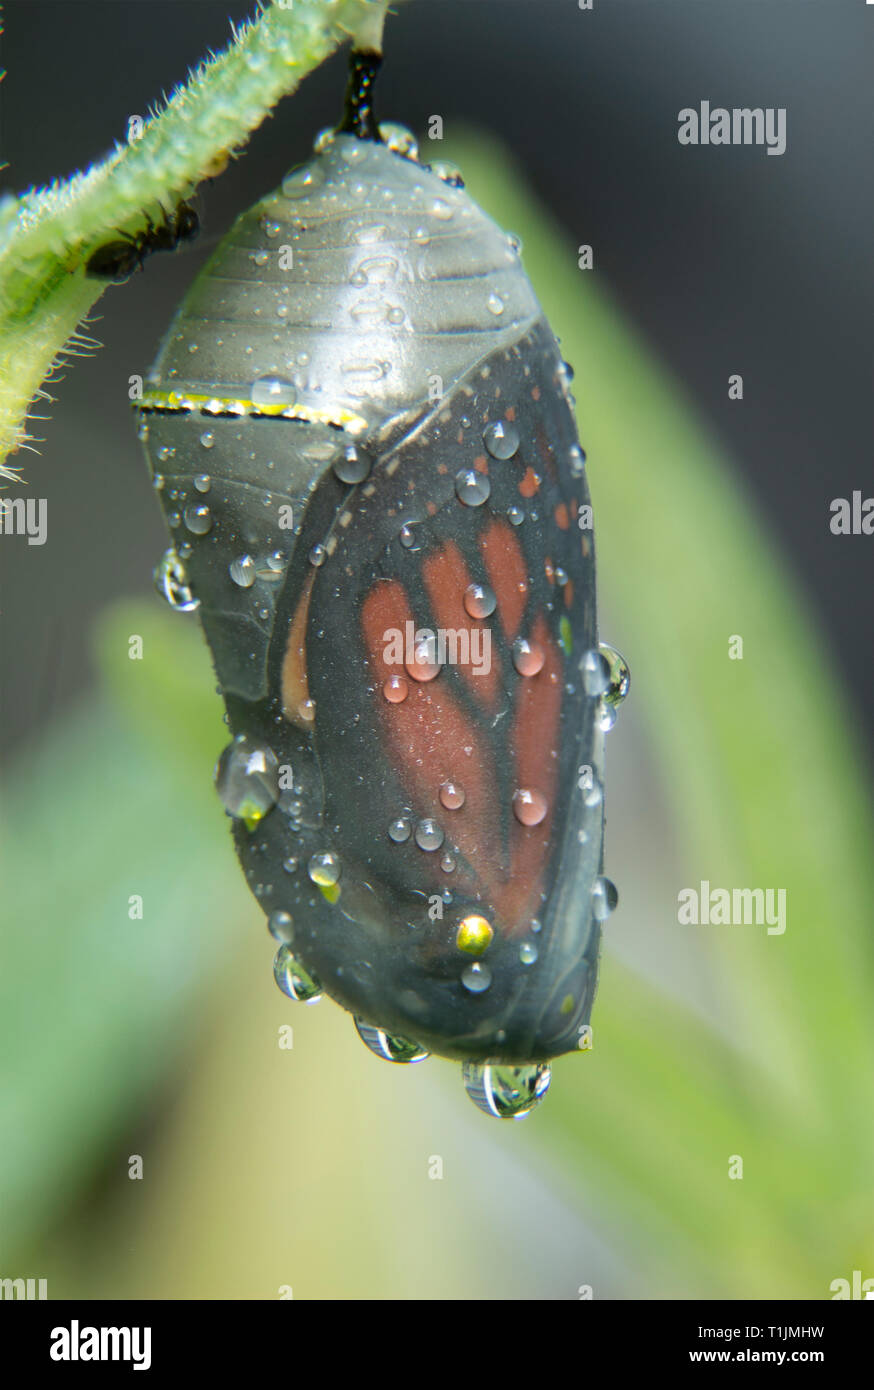 A mature monarch butterfly chrysalis covered in raindrops Stock Photo